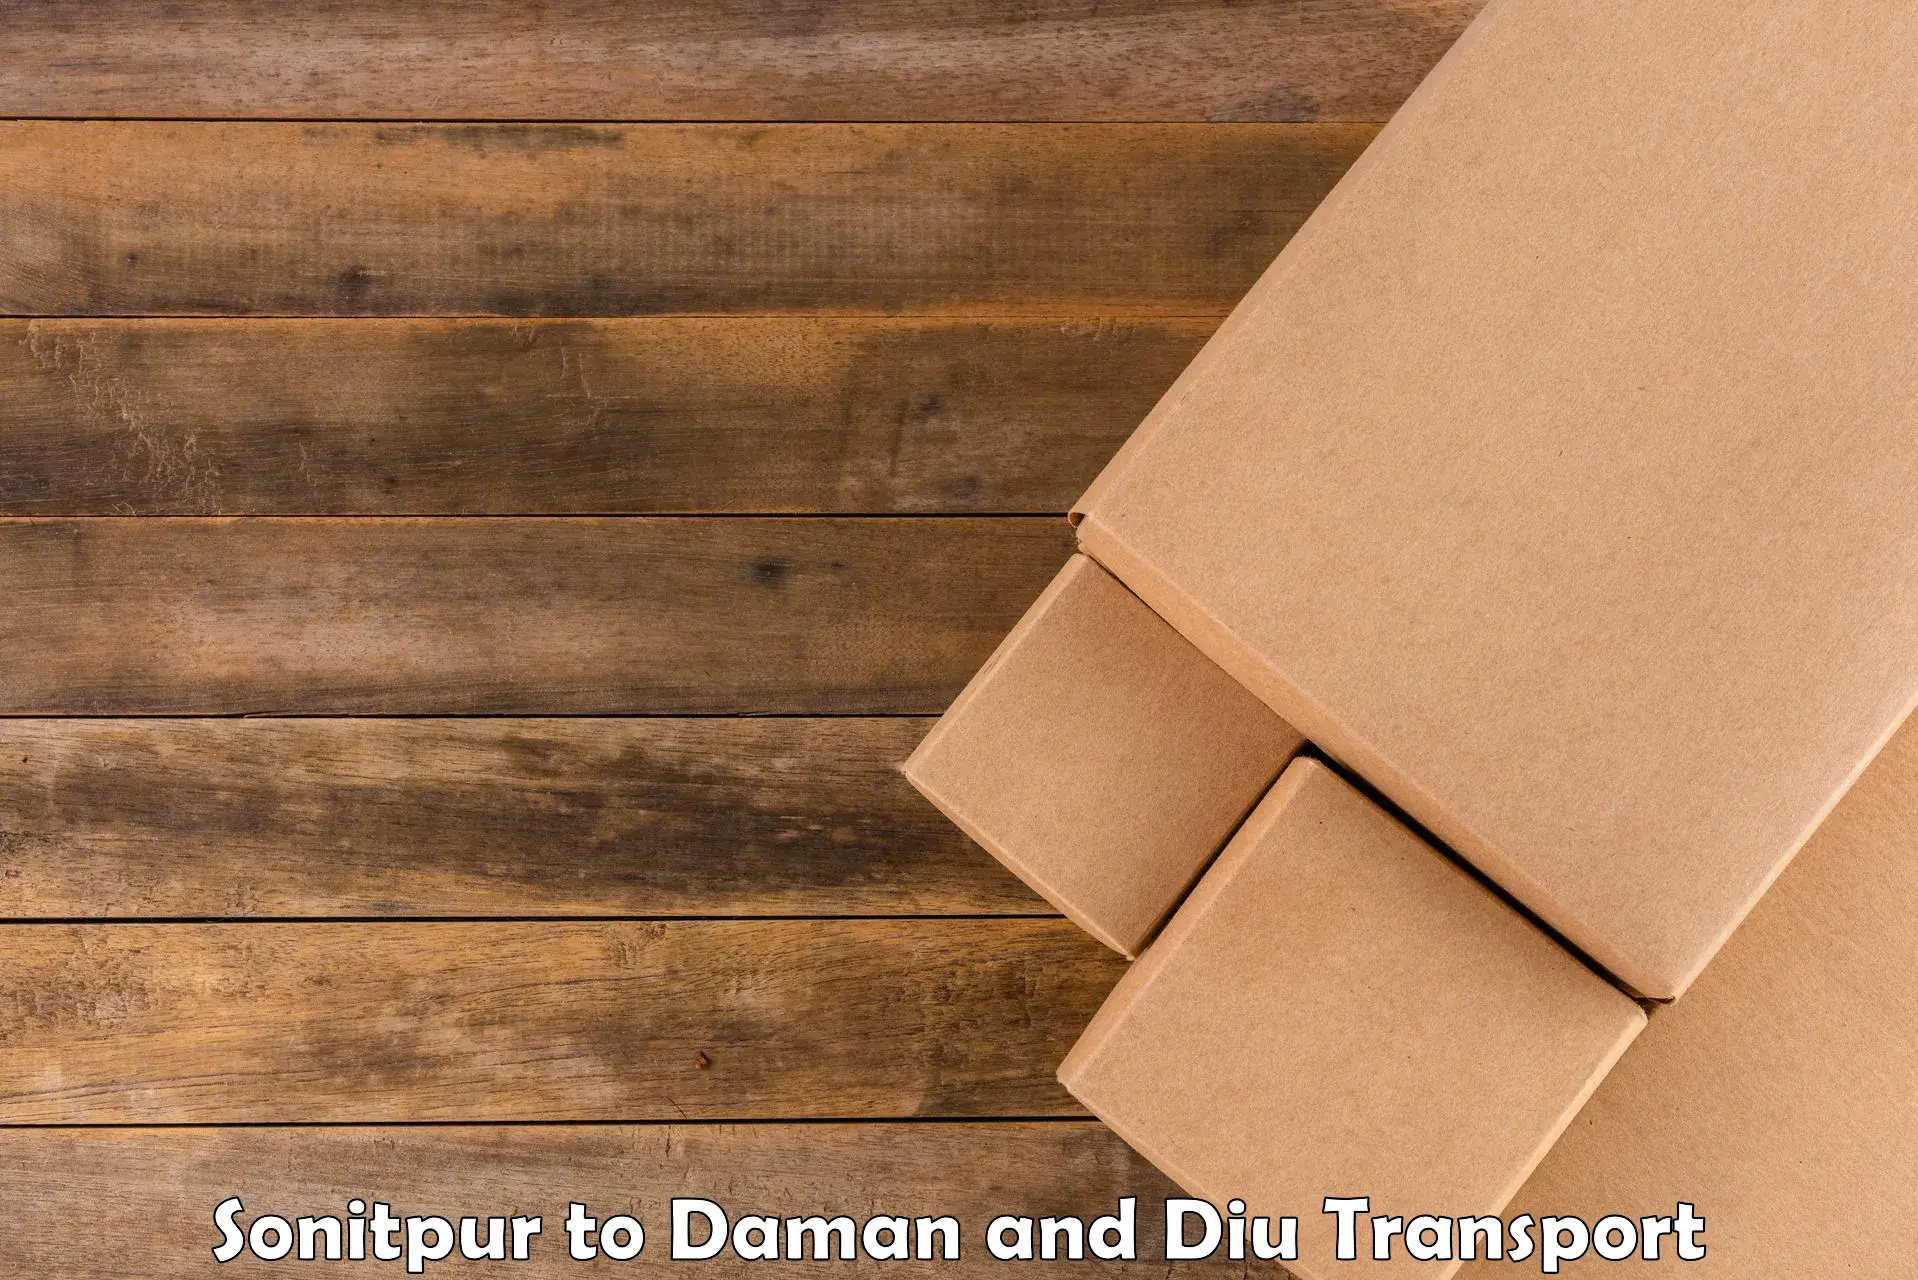 Delivery service Sonitpur to Daman and Diu